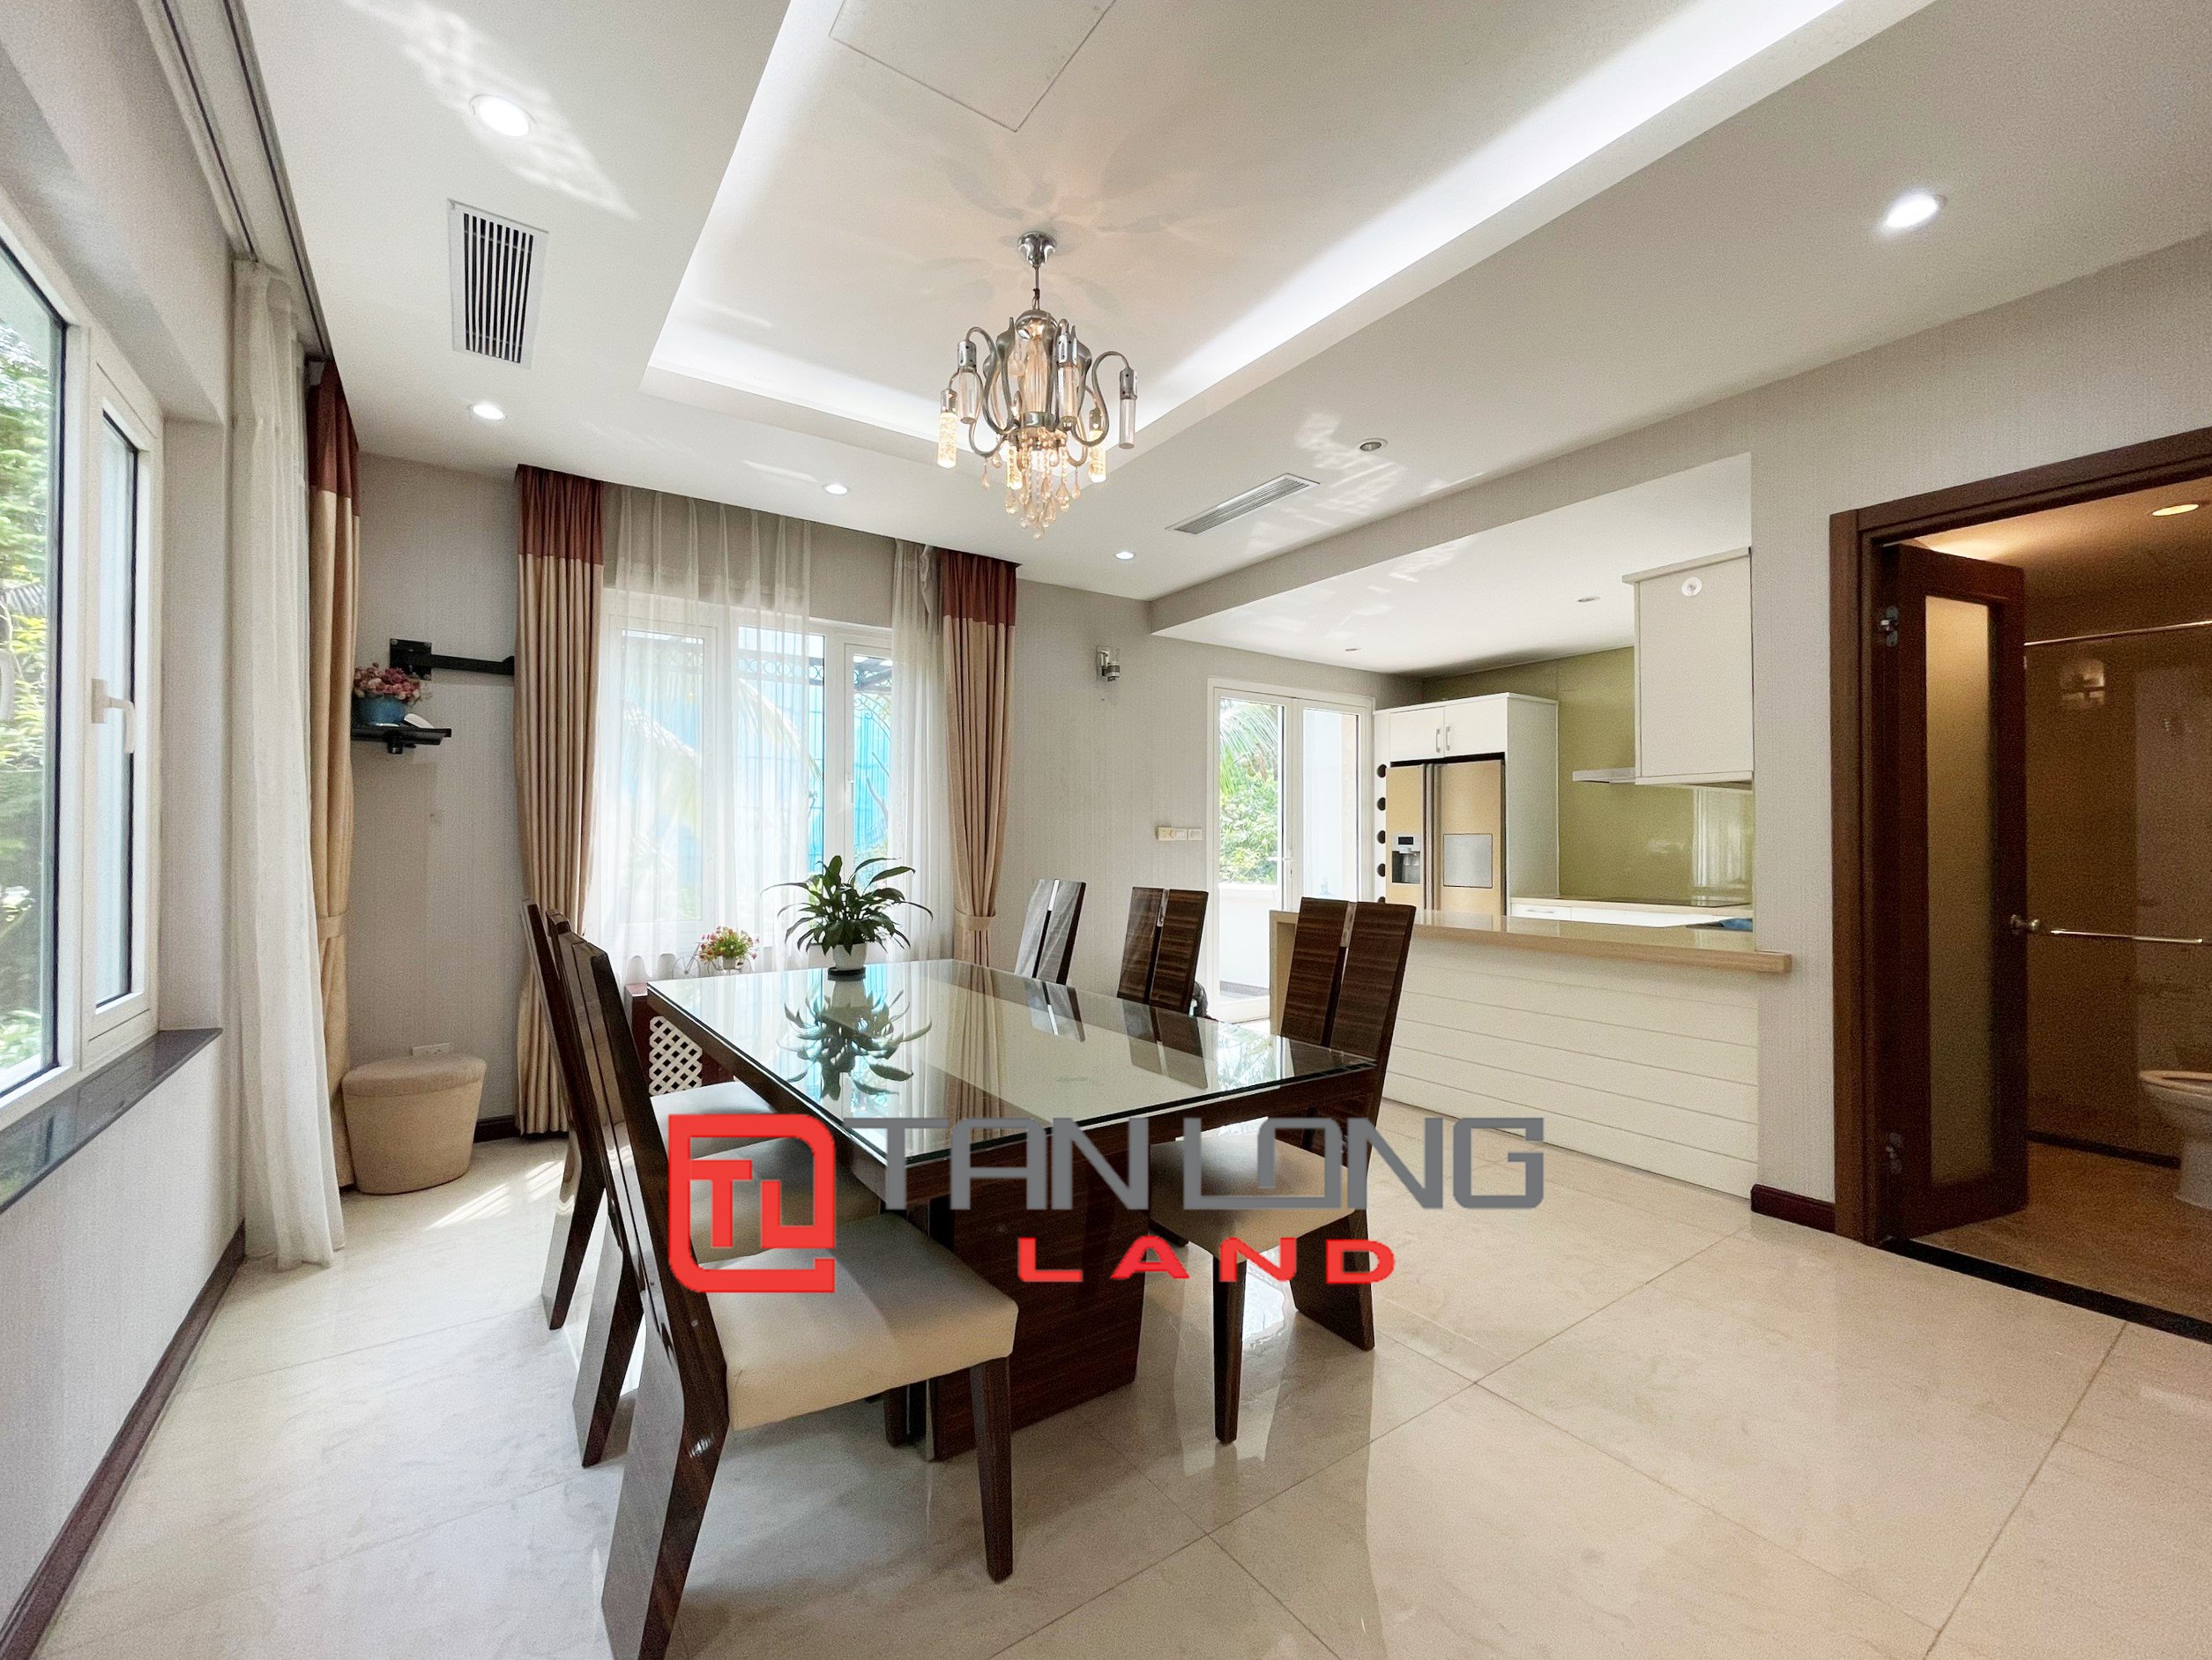 Fully Furnished Villa for rent with 4 Bedrooms near Vincom Shopping Center at Vinhomes Riverside 7